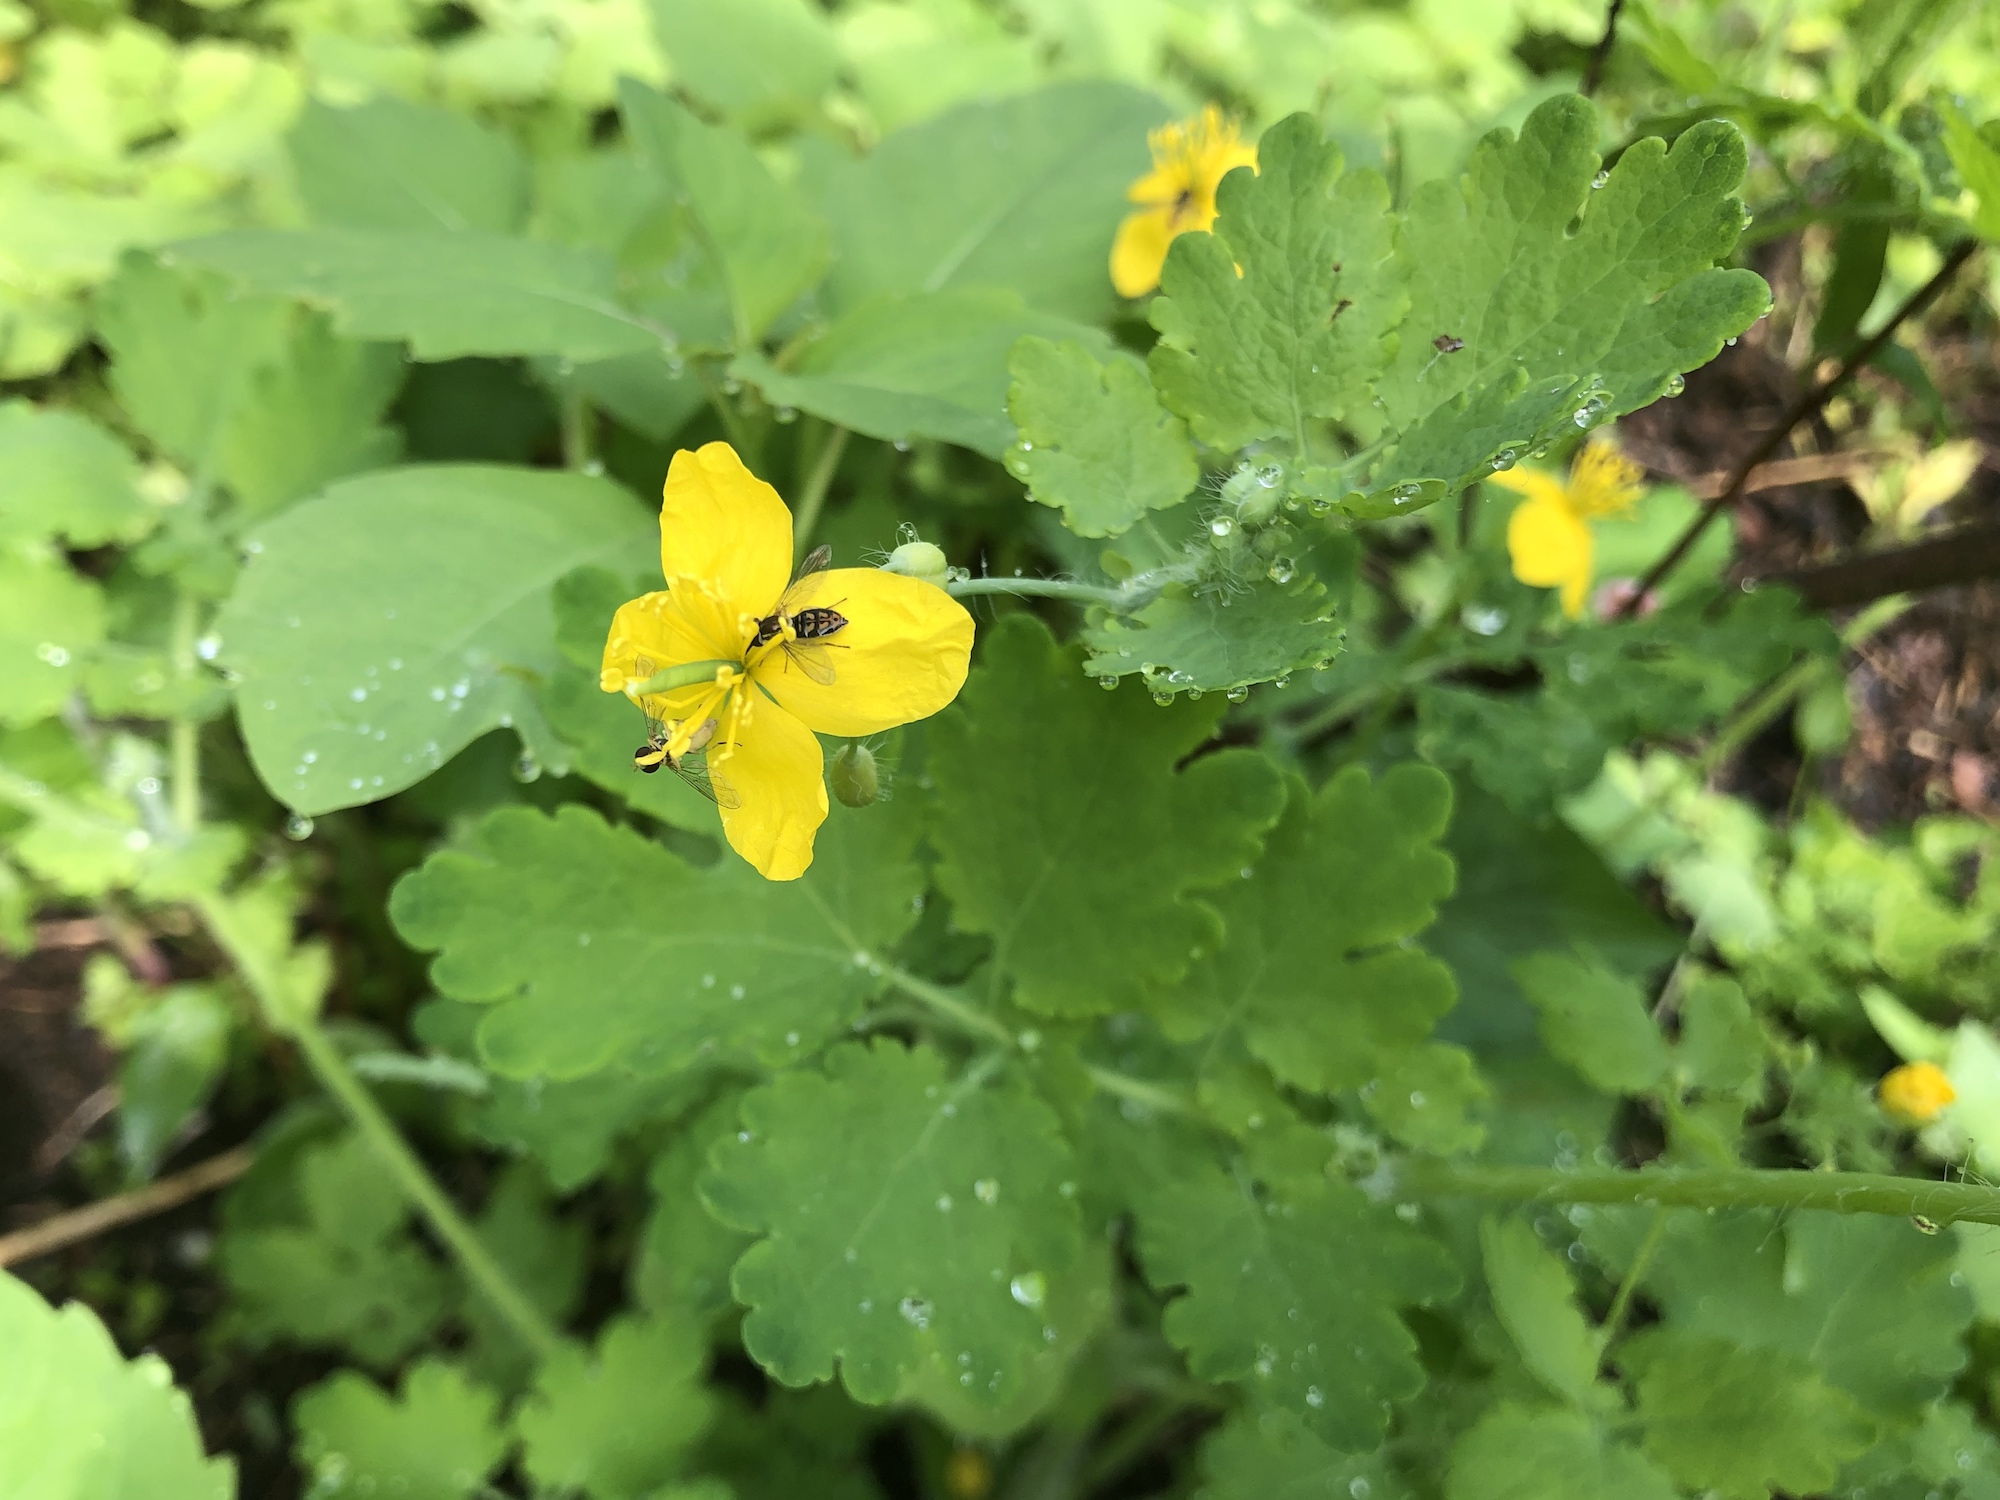 Greater Celandine on May 25, 2019.